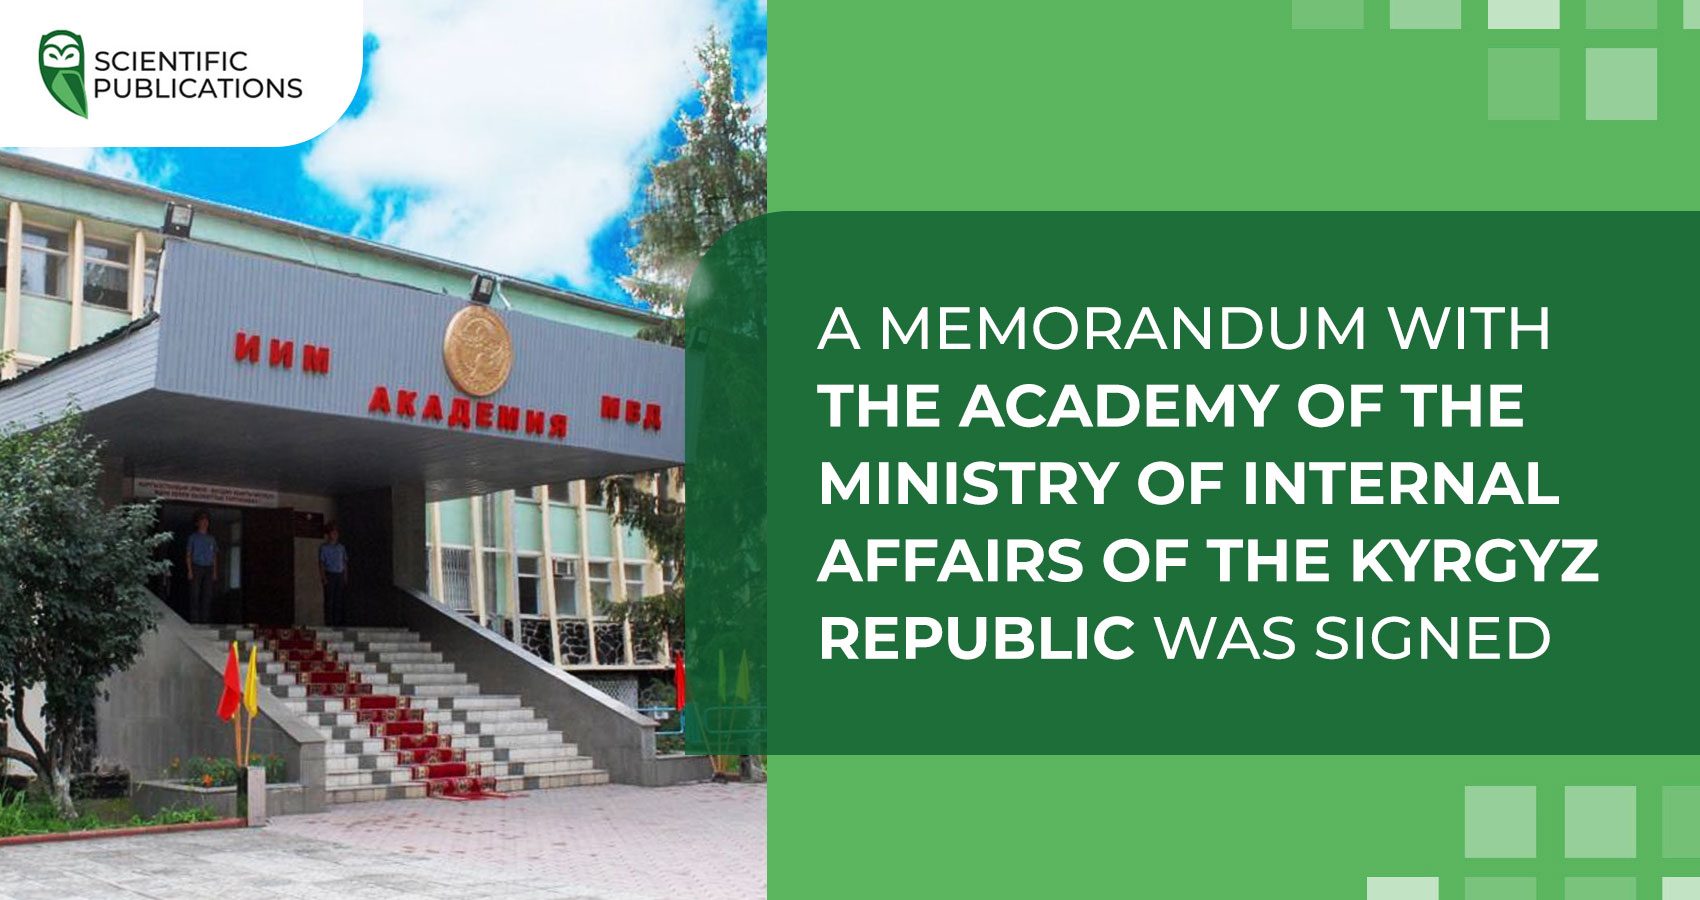 A memorandum with the Academy of the Ministry of Internal Affairs of the Kyrgyz Republic has been signed